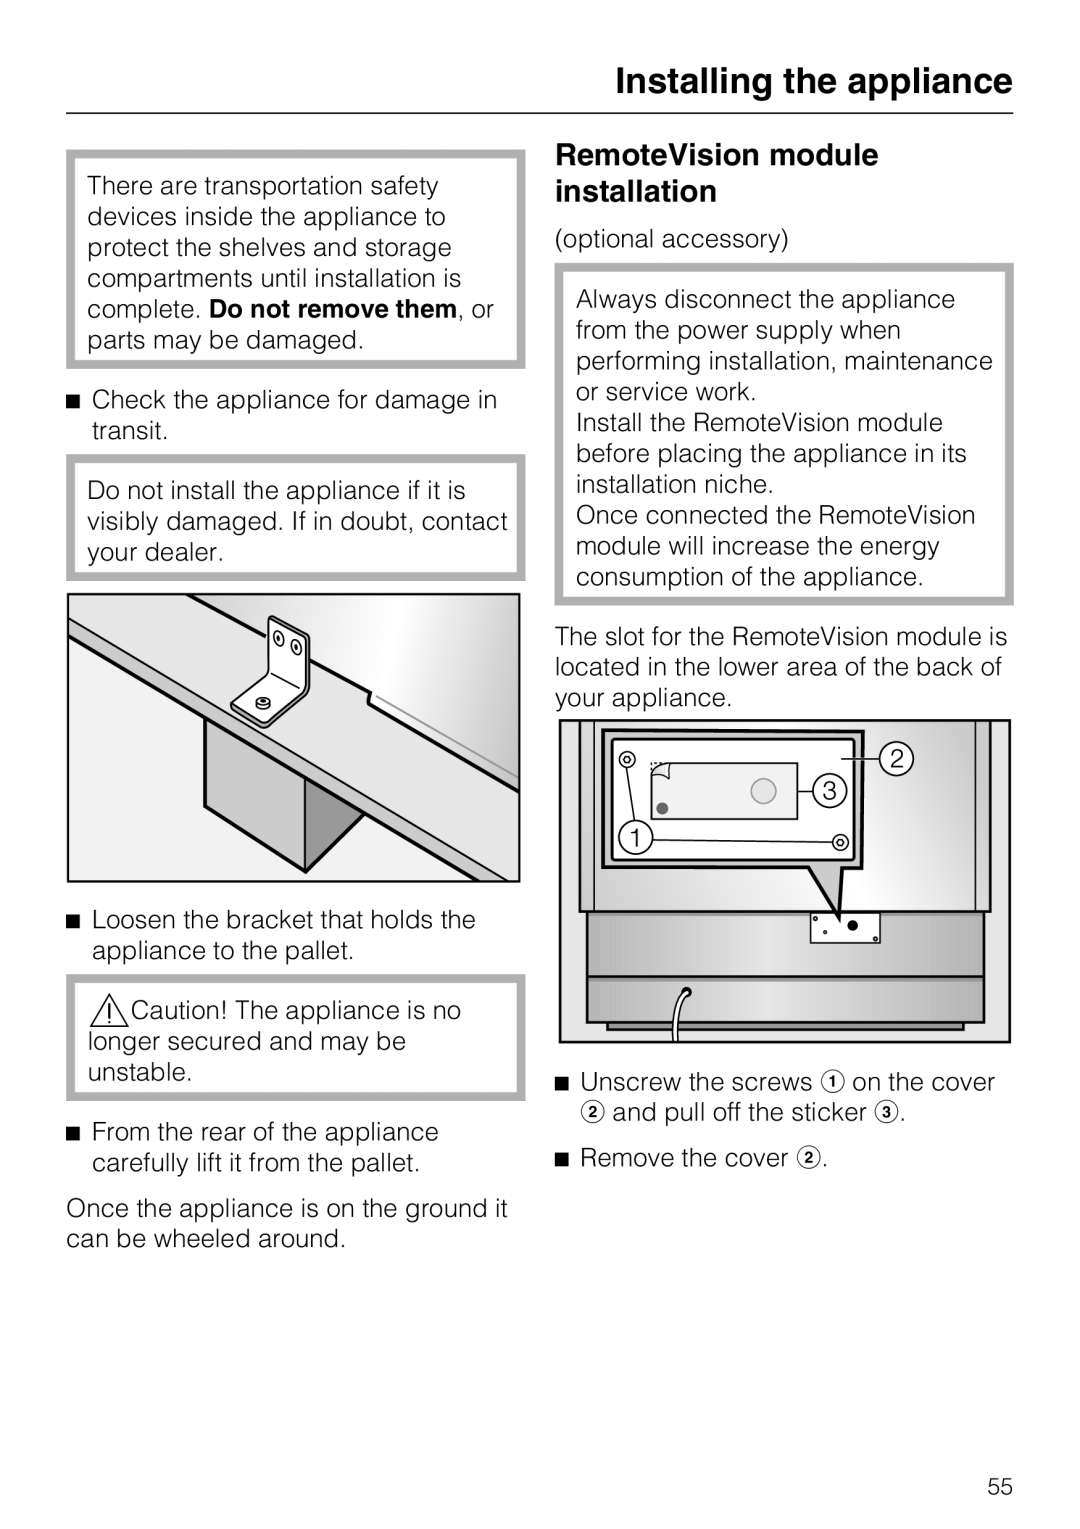 Miele F 1411 SF installation instructions RemoteVision module installation, Installing the appliance 